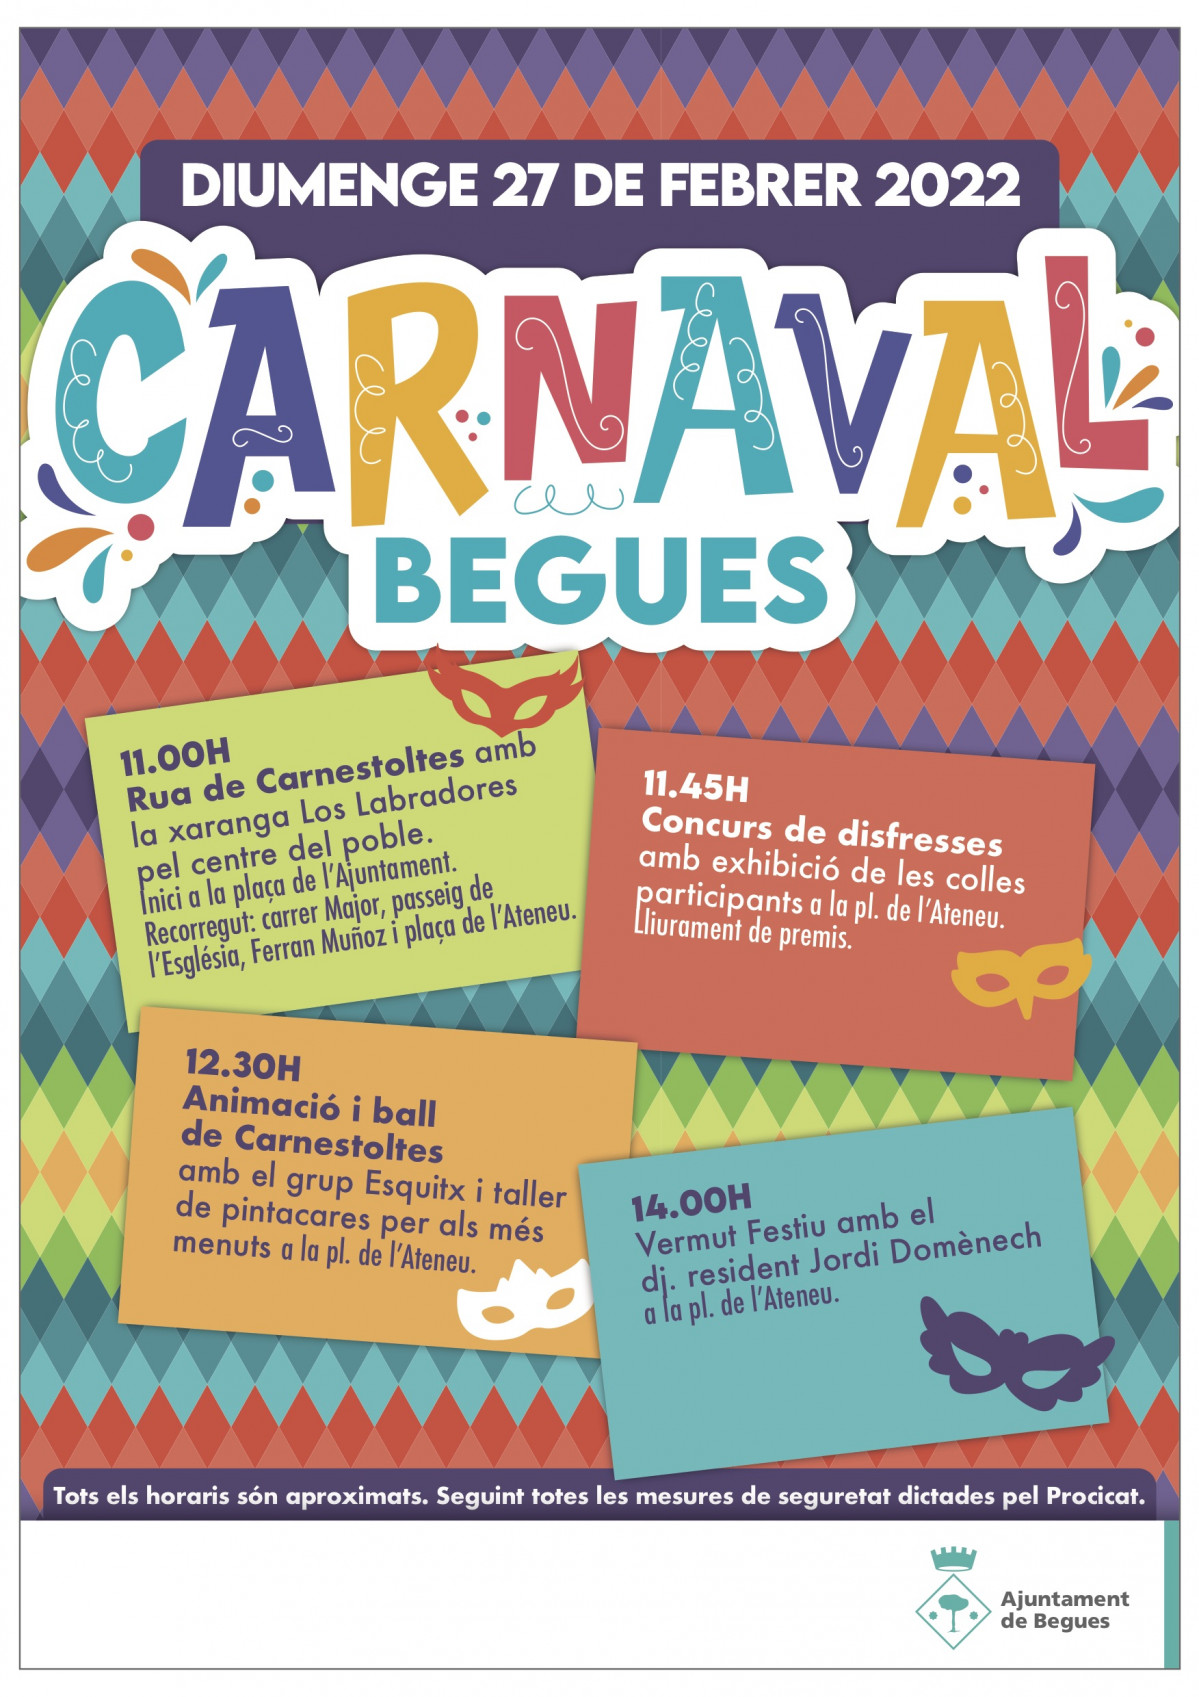 Carnaval Begues 2022